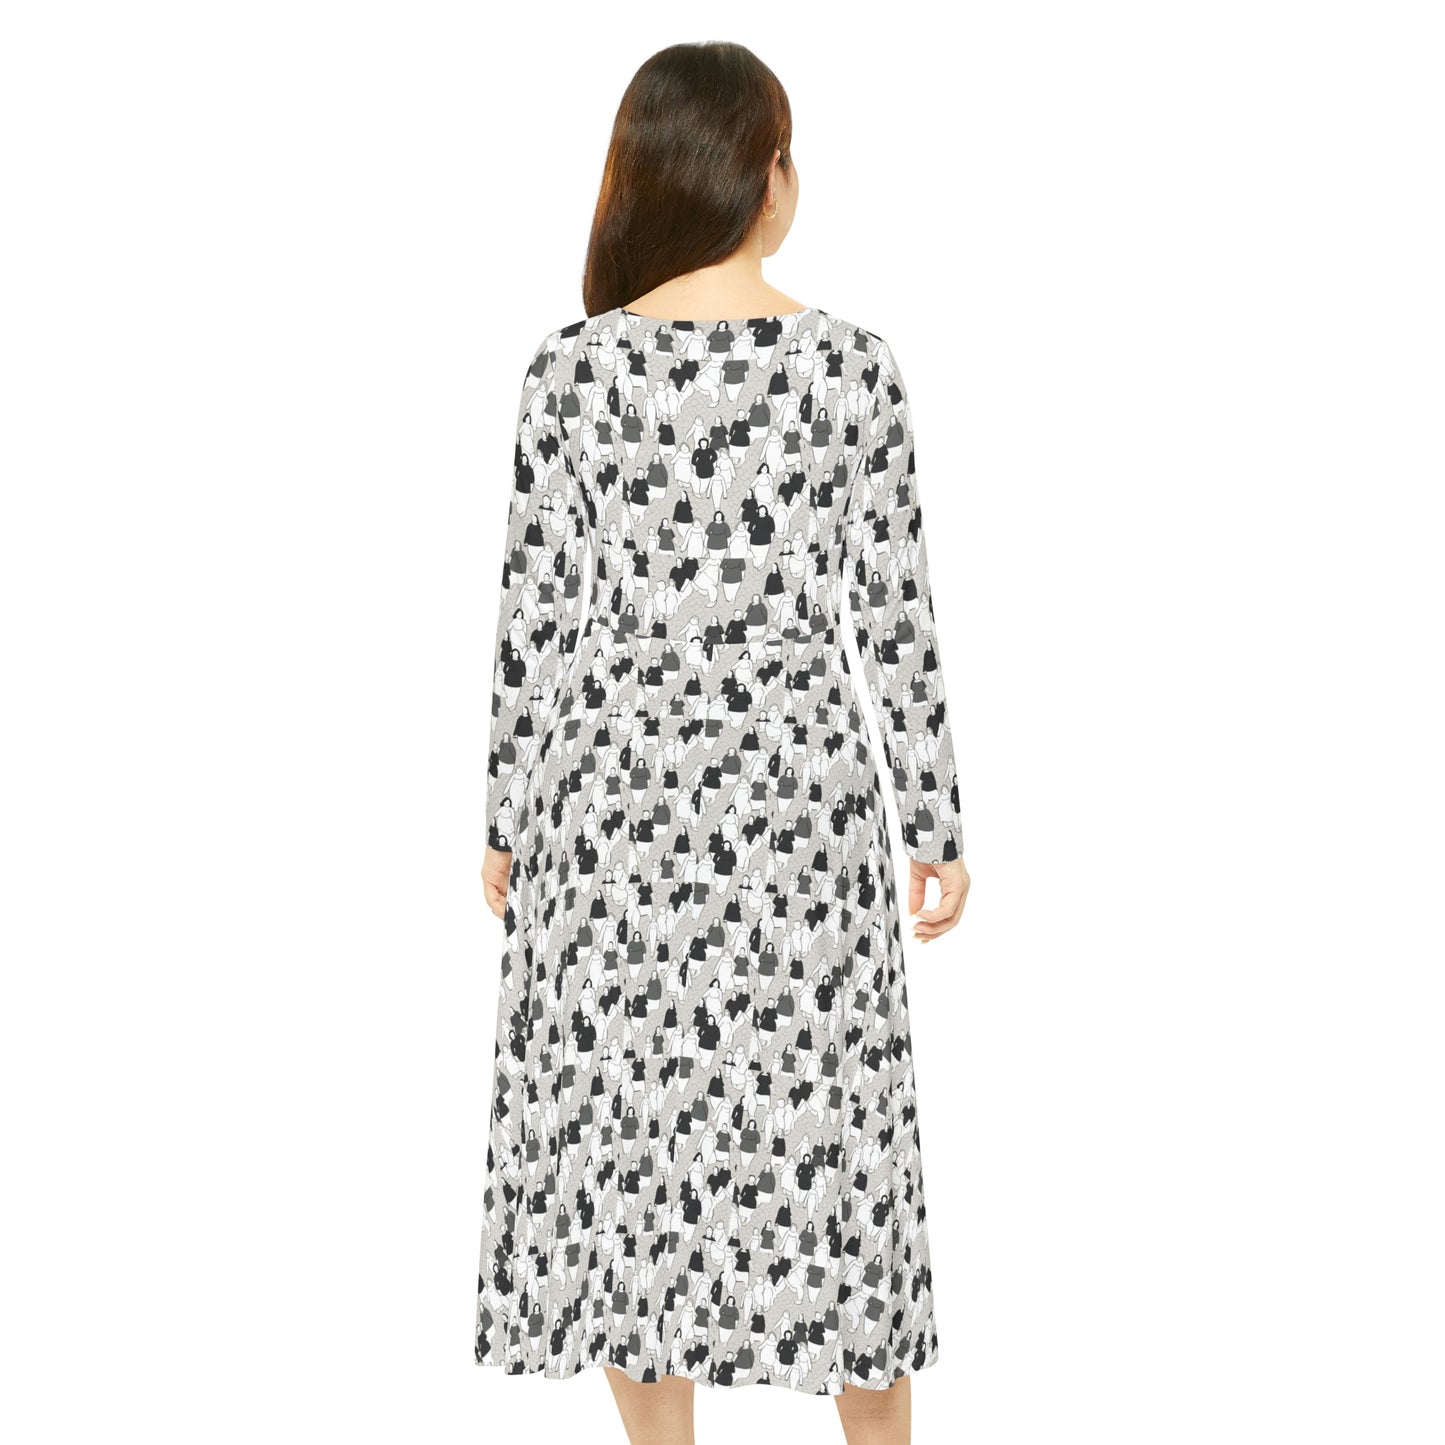 Crowded Patterned Long Sleeve Dance Dress - Grayscale